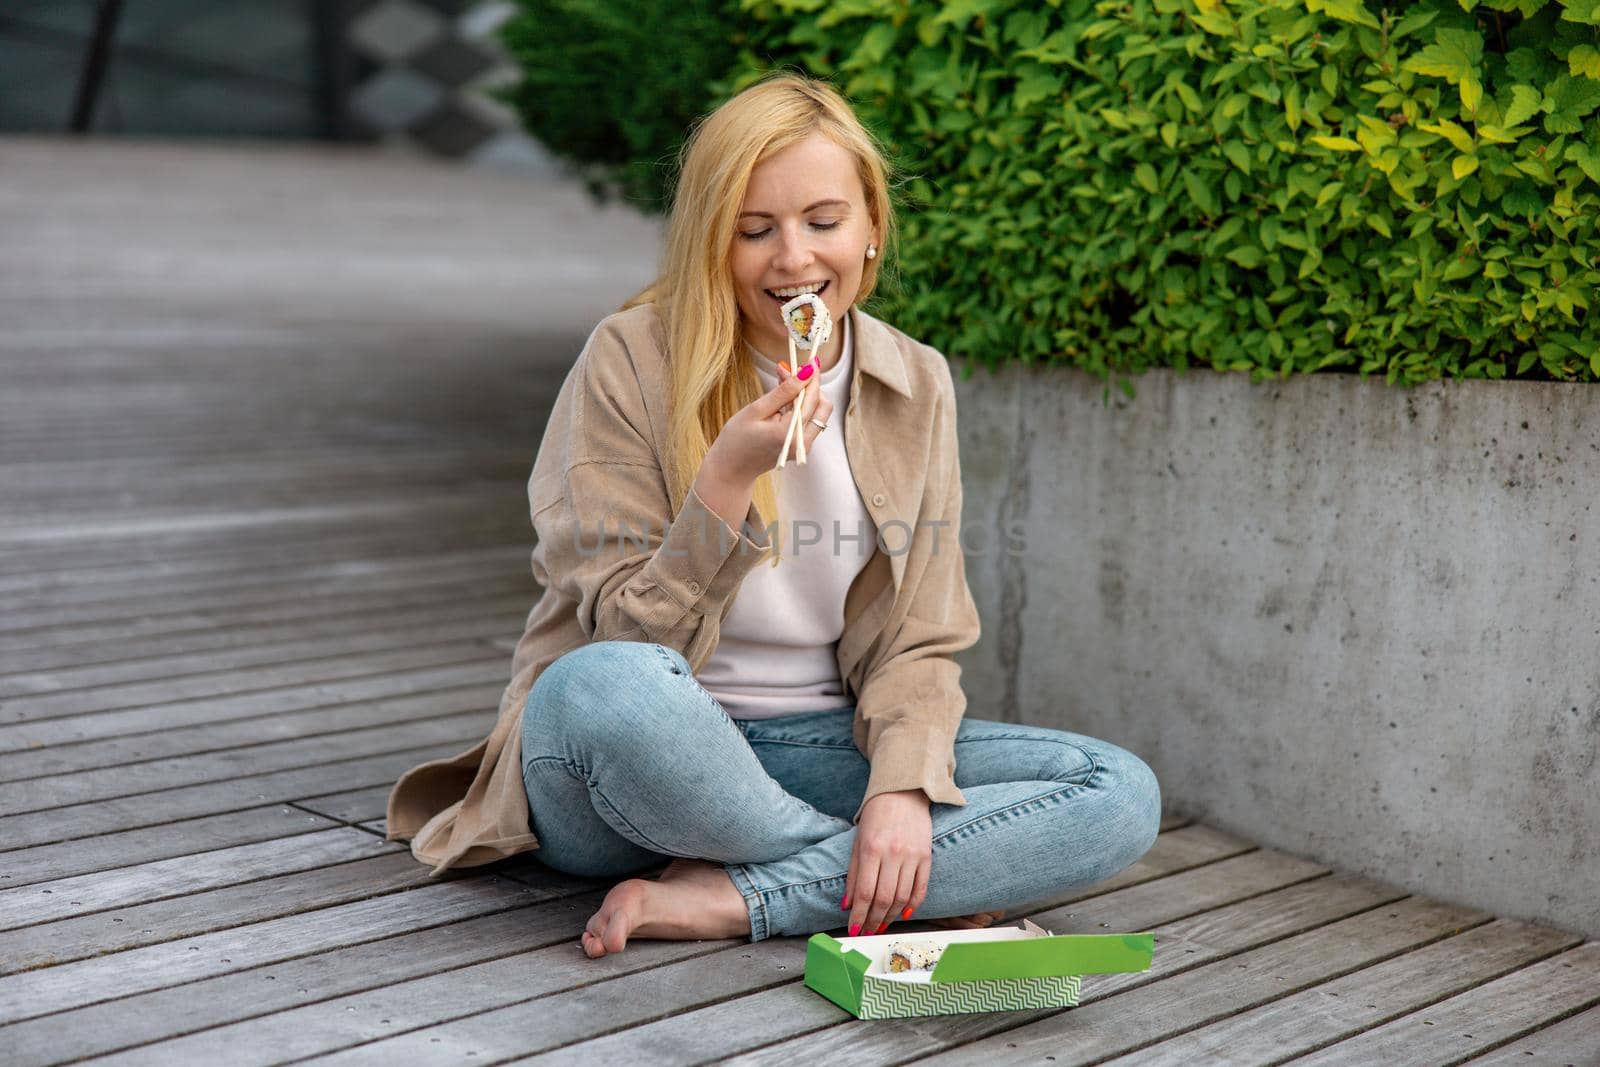 Young beautiful blond woman eating sushi outdoors, on the wooden terrace, by modern building in the city. Tasty food to go. Girl has lunch break, spending time outside and eating Asian food. City life by creativebird